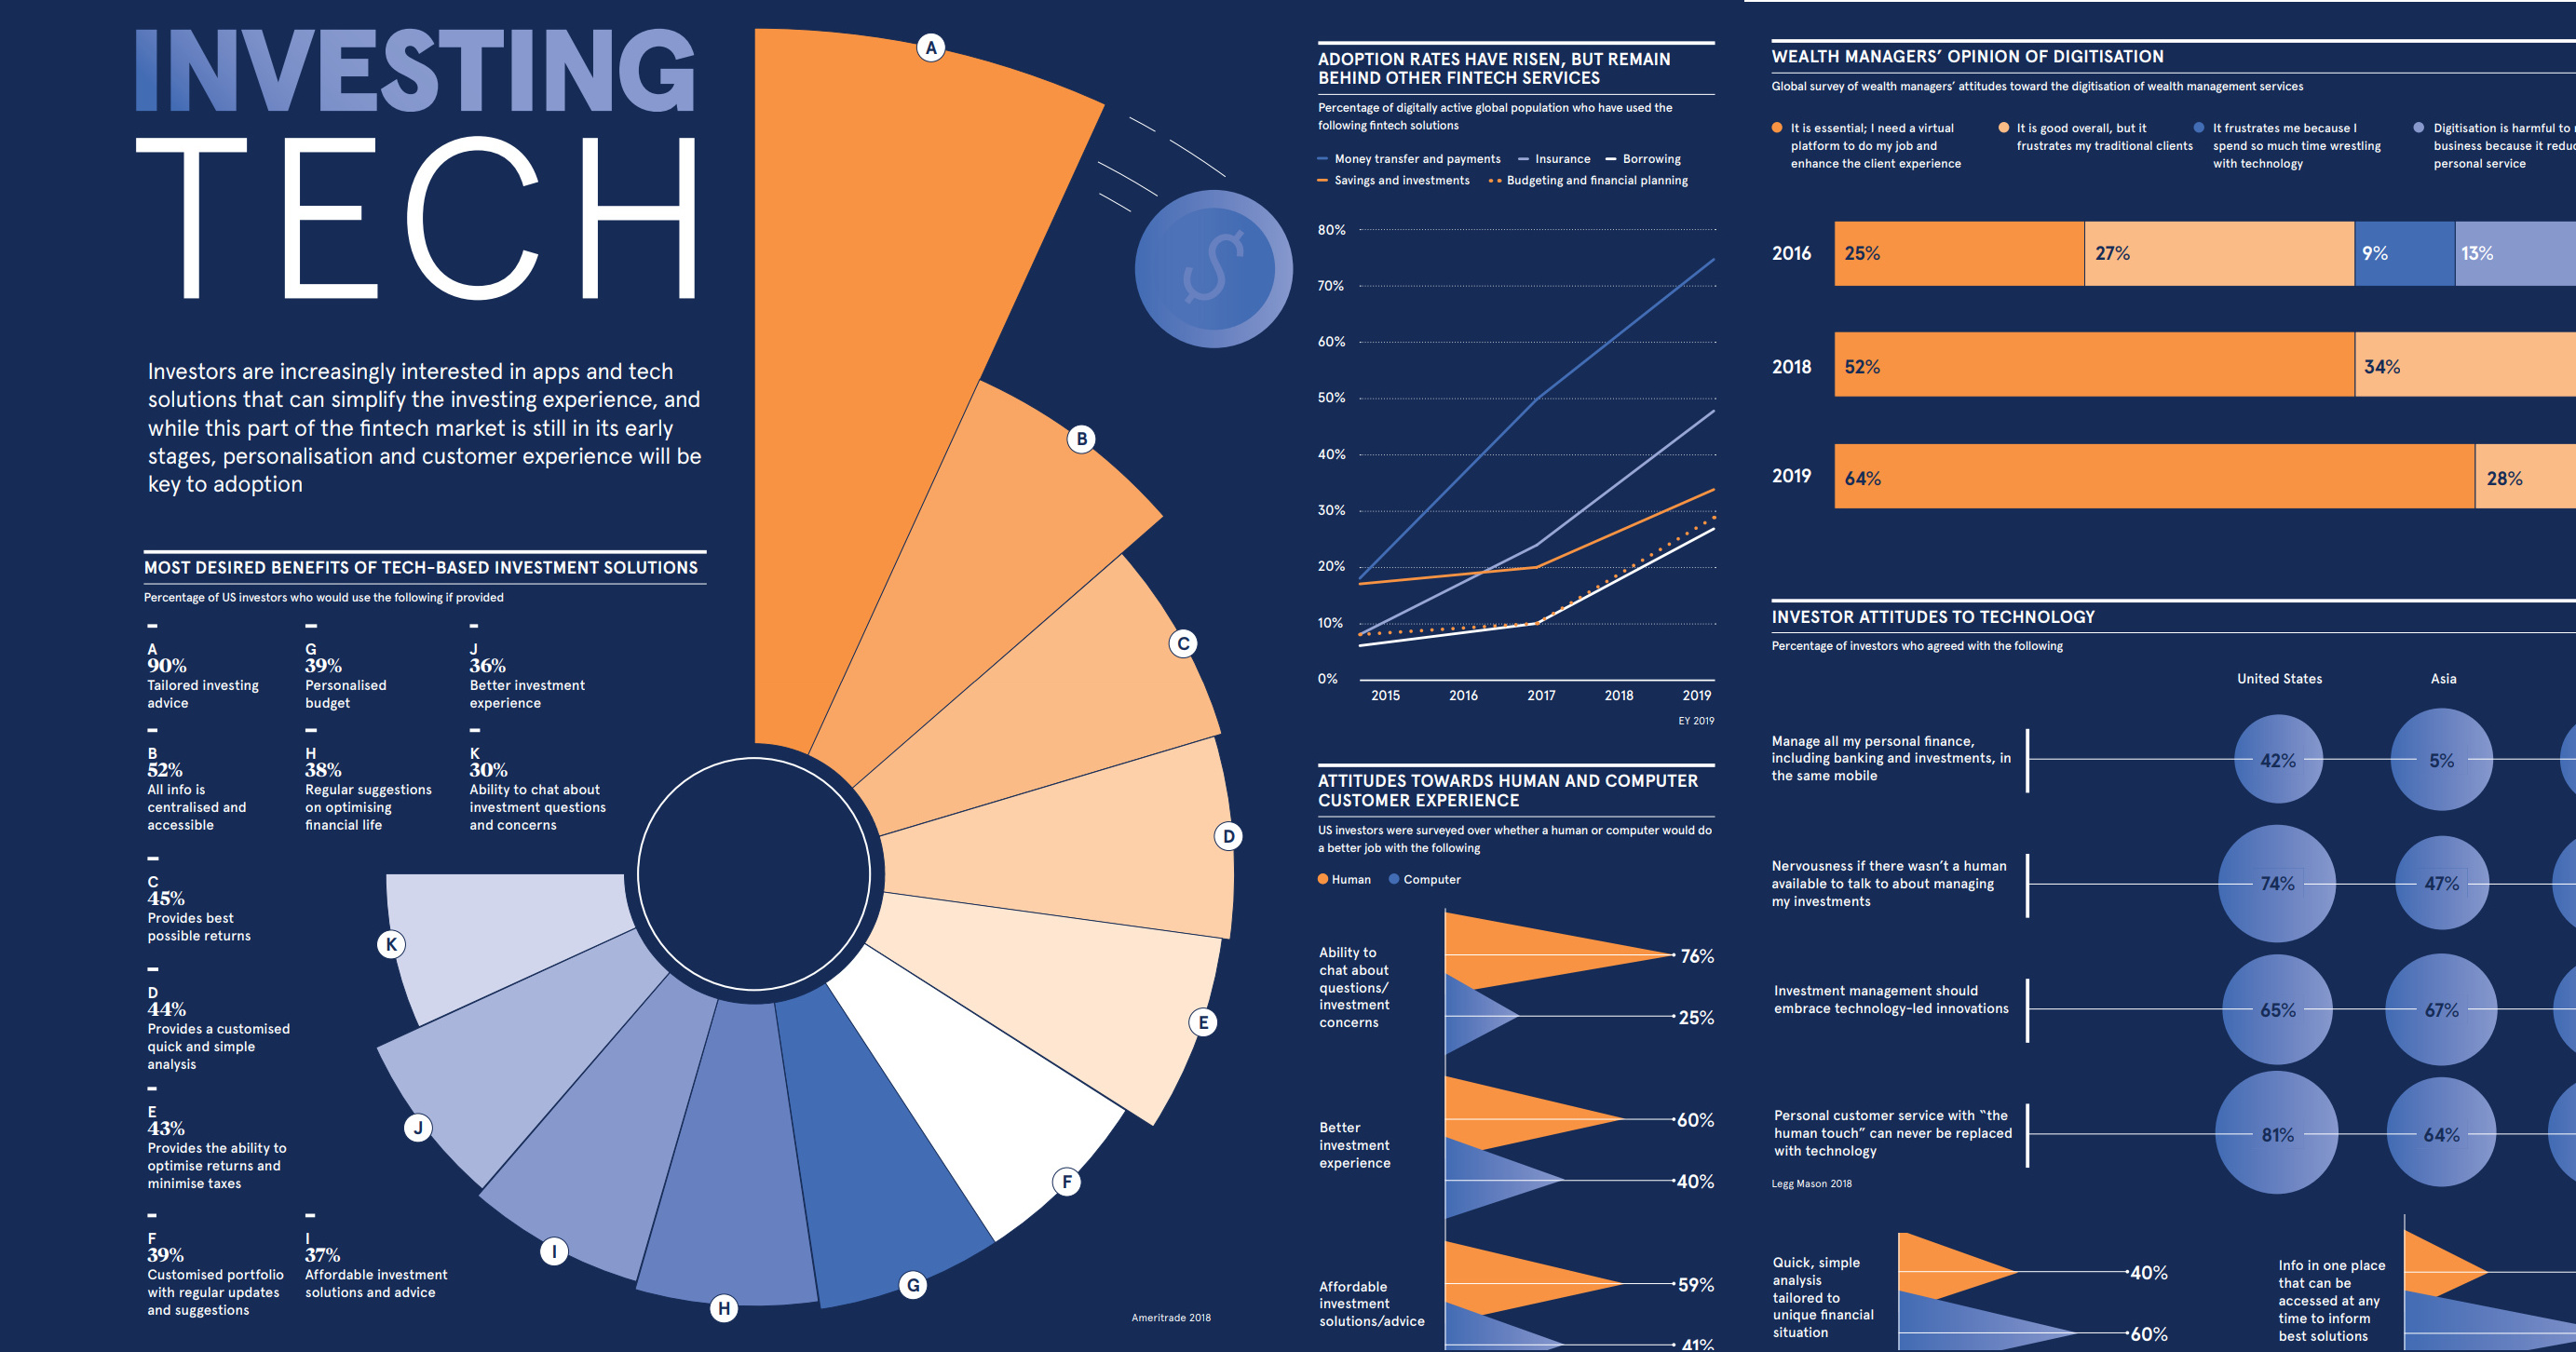 Visualized: The Rise of Investment Technology